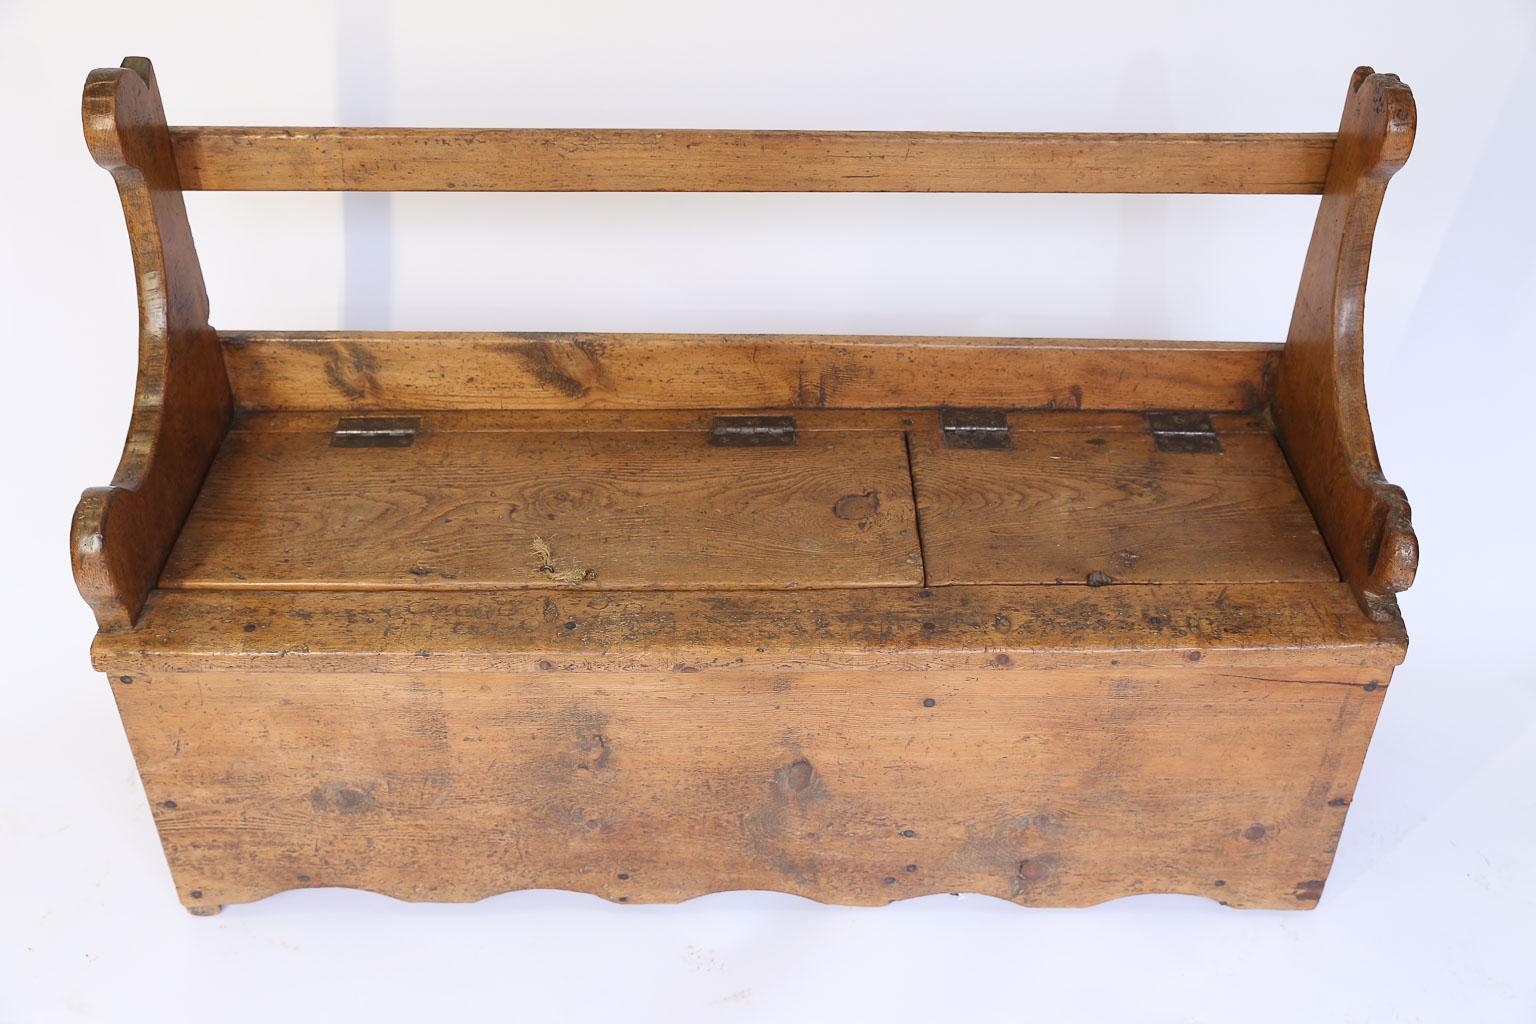 This is a beautiful pine Swedish bench handcrafted in the late 1800s. The waxed patina and minimal decoration enhance the rustic charm of this wonderful piece while the seat lifts on iron hinges in two places to allow storage. The piece is solid and